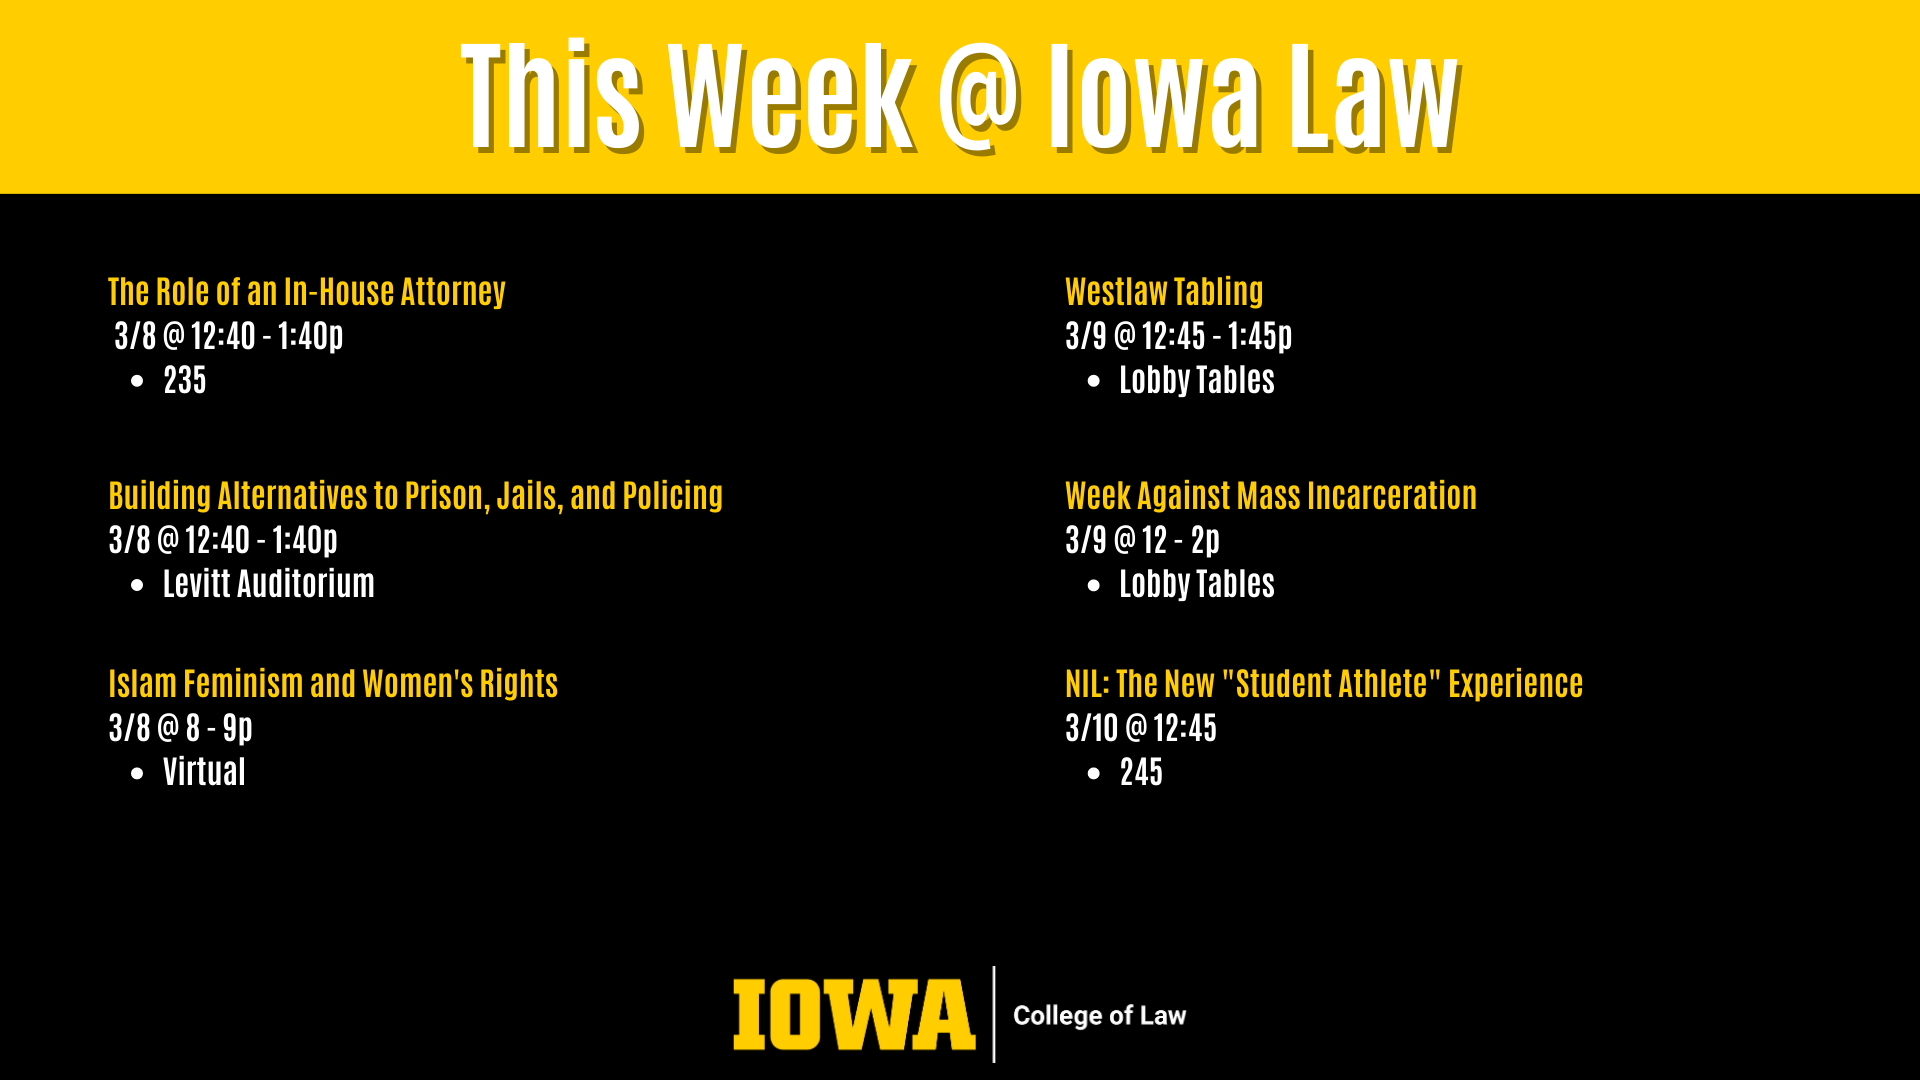 This Week @ Iowa Law Westlaw Tabling  3/9 @ 12:45 - 1:45p  Lobby Tables The Role of an In-House Attorney  3/8 @ 12:40 - 1:40p  235 Islam Feminism and Women's Rights  3/8 @ 8 - 9p  Virtual Week Against Mass Incarceration  3/9 @ 12 - 2p  Lobby Tables NIL: The New "Student Athlete" Experience  3/10 @ 12:45 245 Building Alternatives to Prison, Jails, and Policing 3/8 @ 12:40 - 1:40p Levitt Auditorium